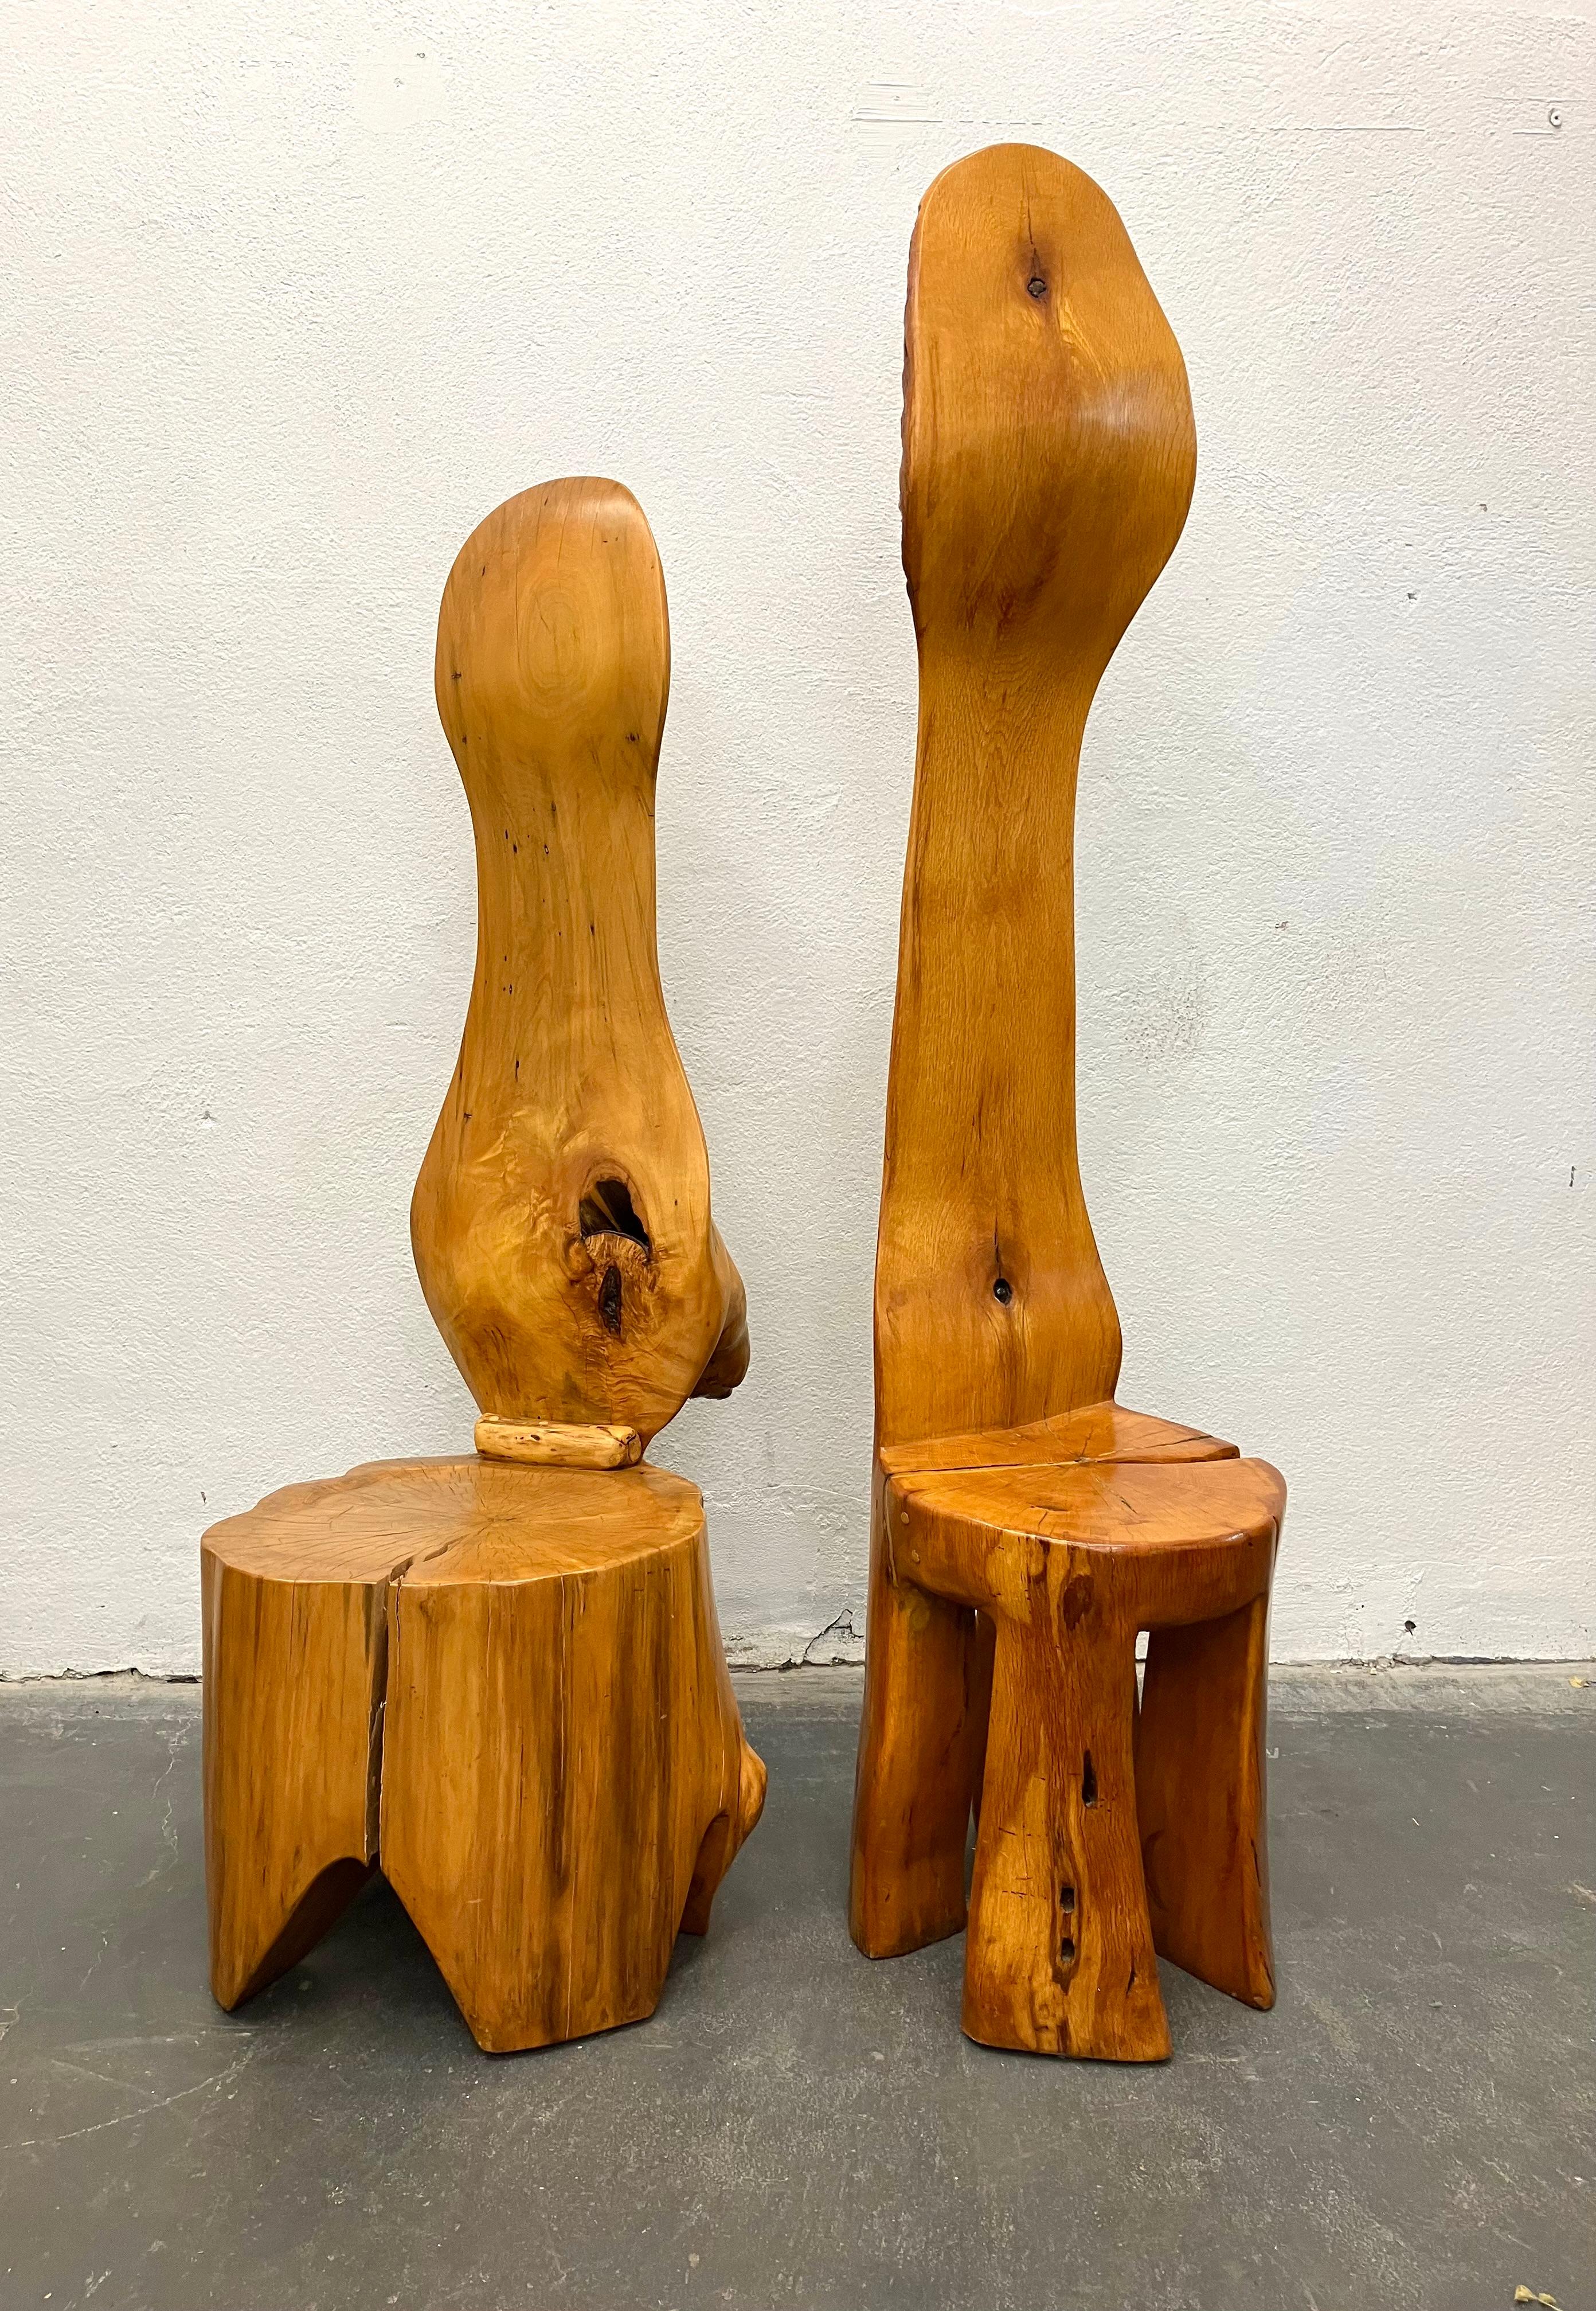 Artisan chairs circa 1960s, in the style of JB Blunk, one carved from a single redwood log, the other from a Cypress log, the taller redwood chair is initialed JB on the leg, with wonderful chip carved decoration on the back. Both are expertly